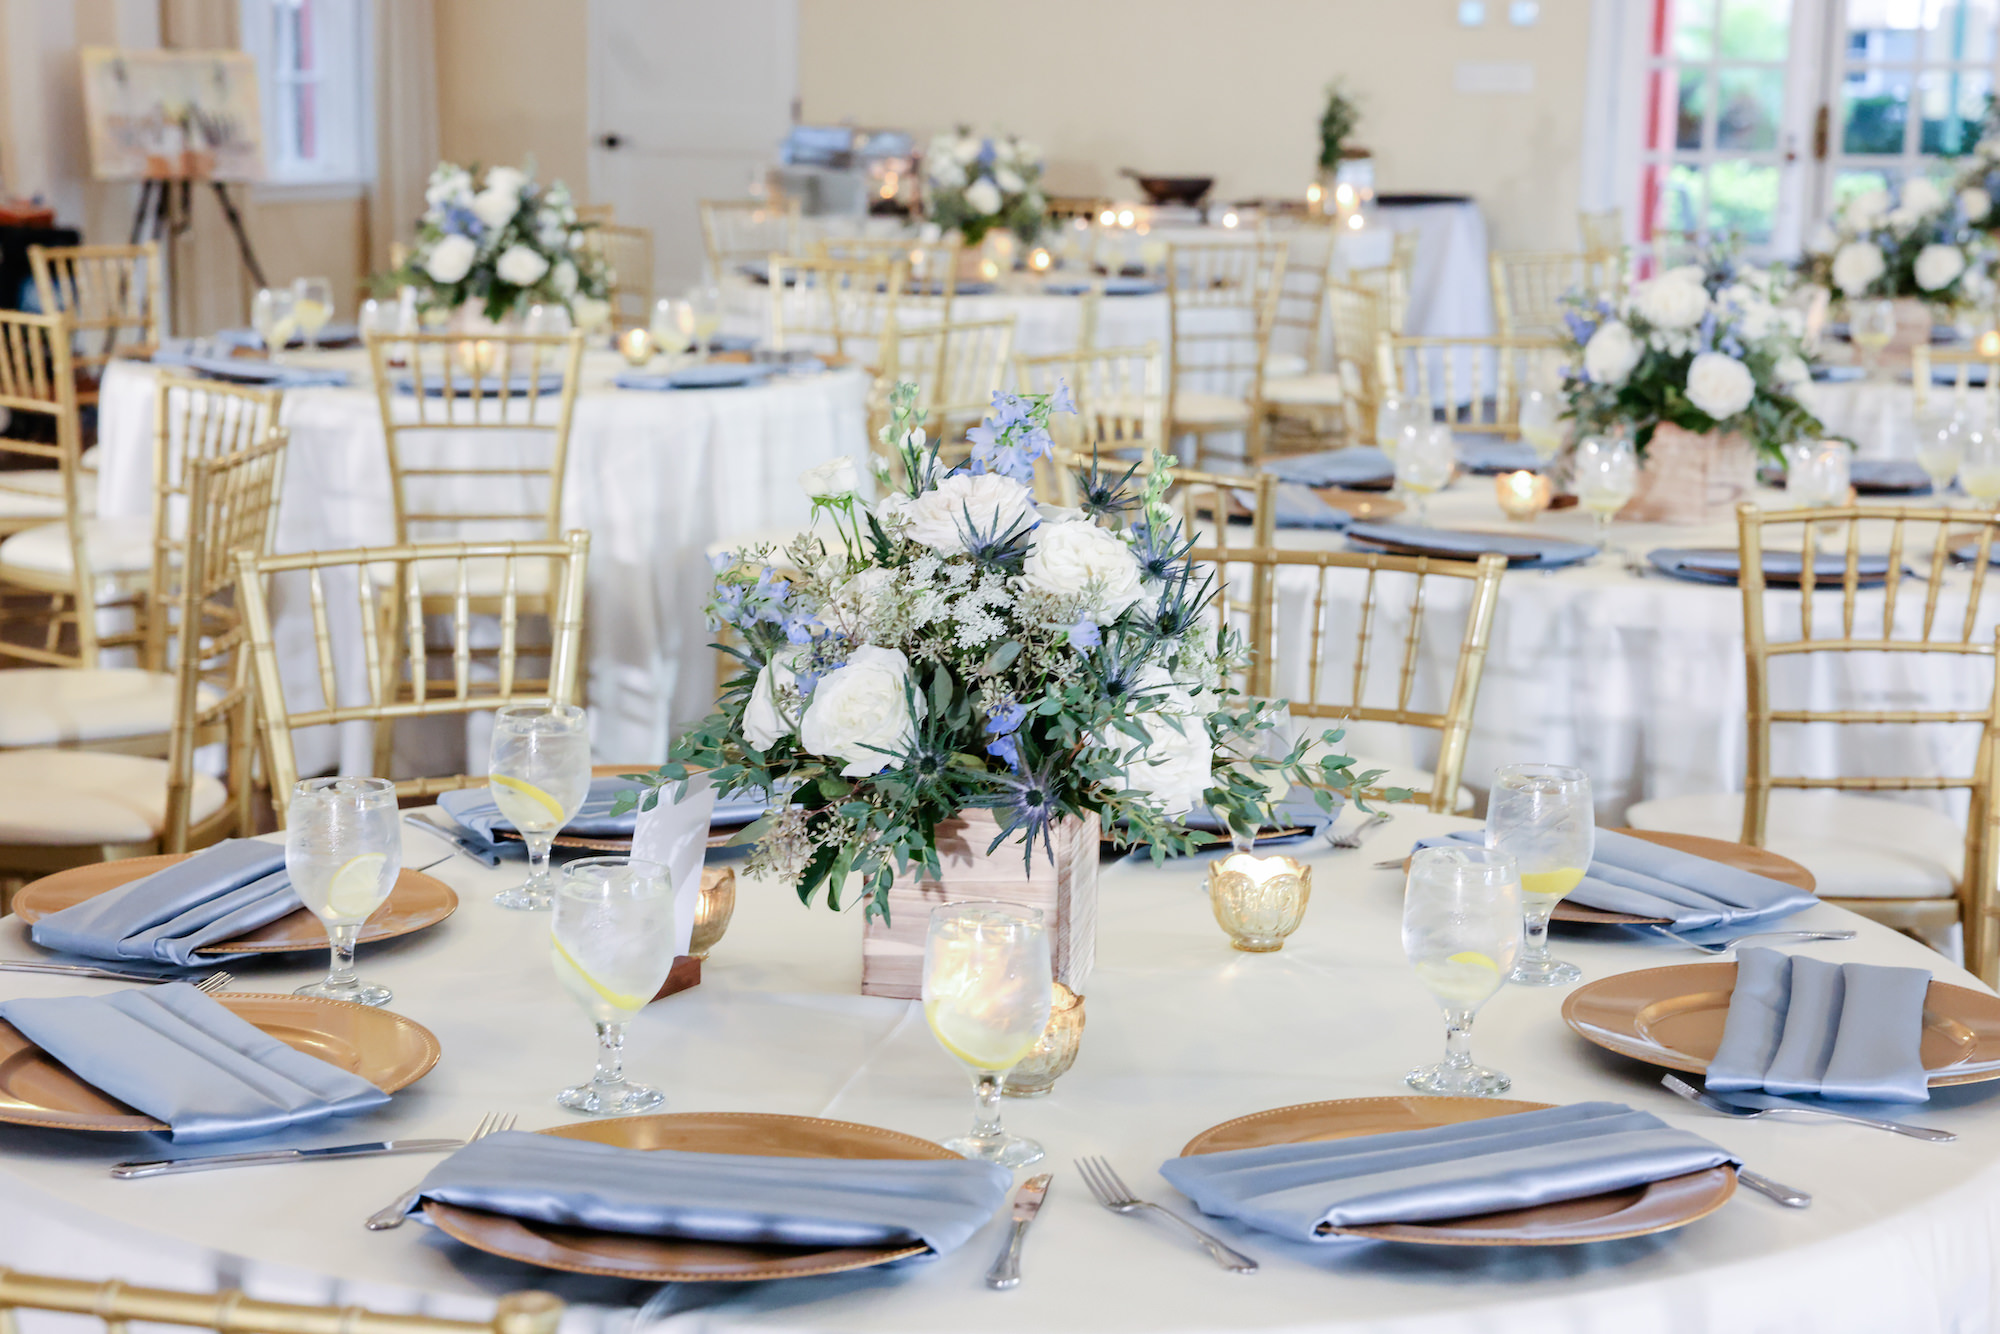 Classic White and Blue Wedding Reception Table Decor Inspiration | Rose and Wildflower Centerpiece Ideas